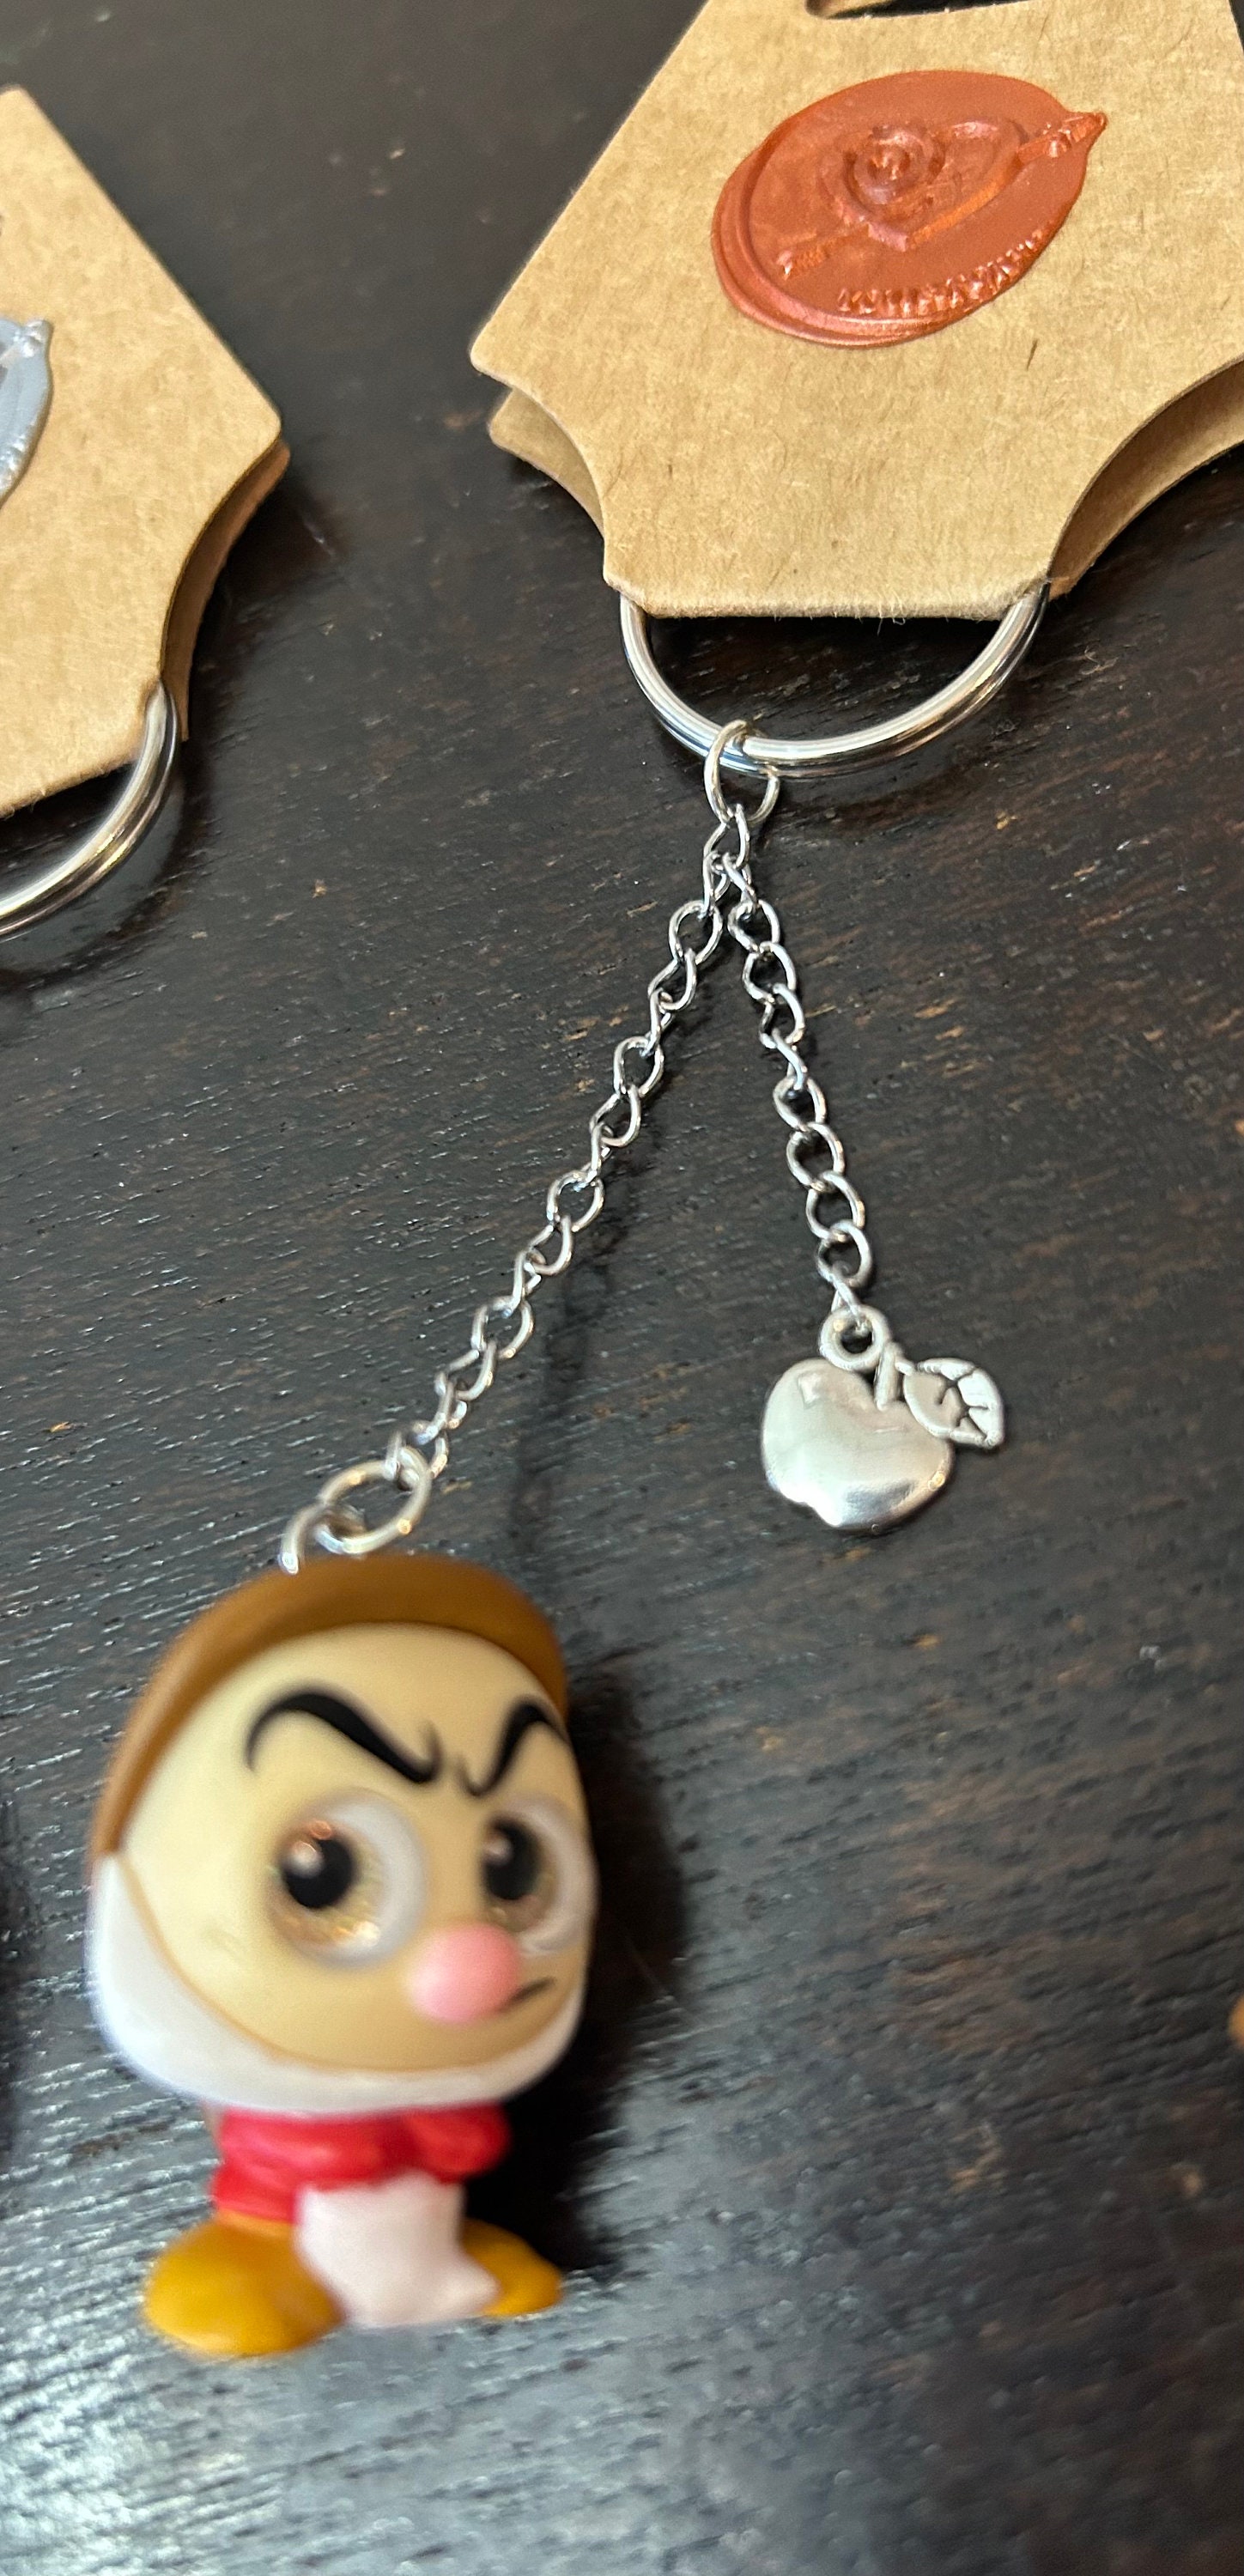 Snow White and the Seven Dwarfs Keychains - Etsy